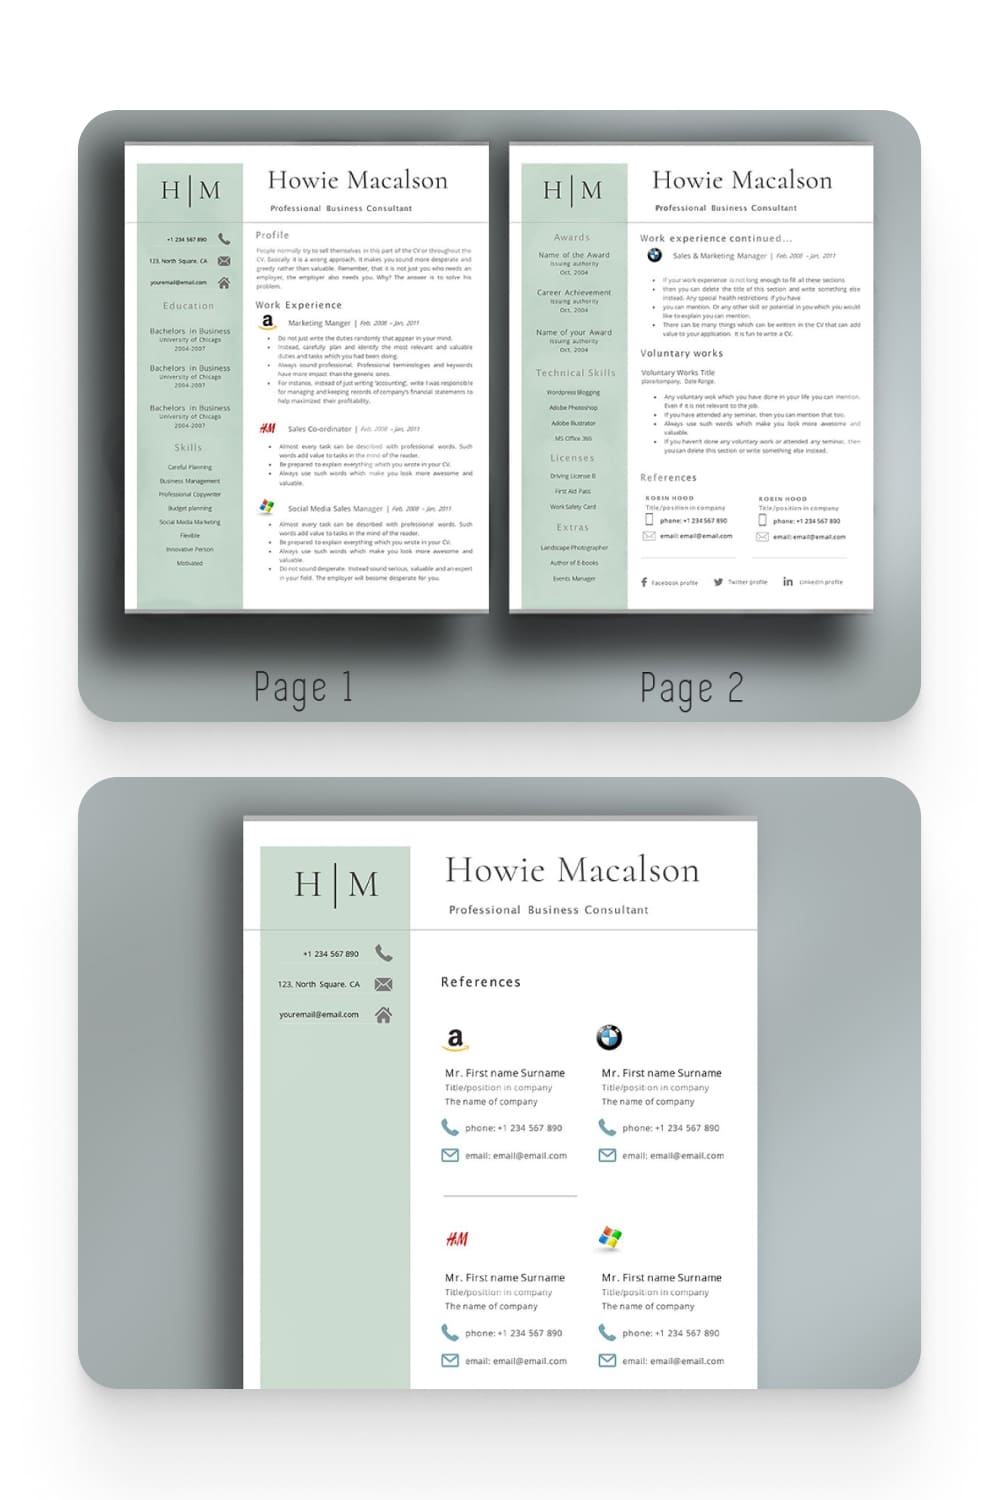 Collage of two-column Resume images with white background and green stripe.